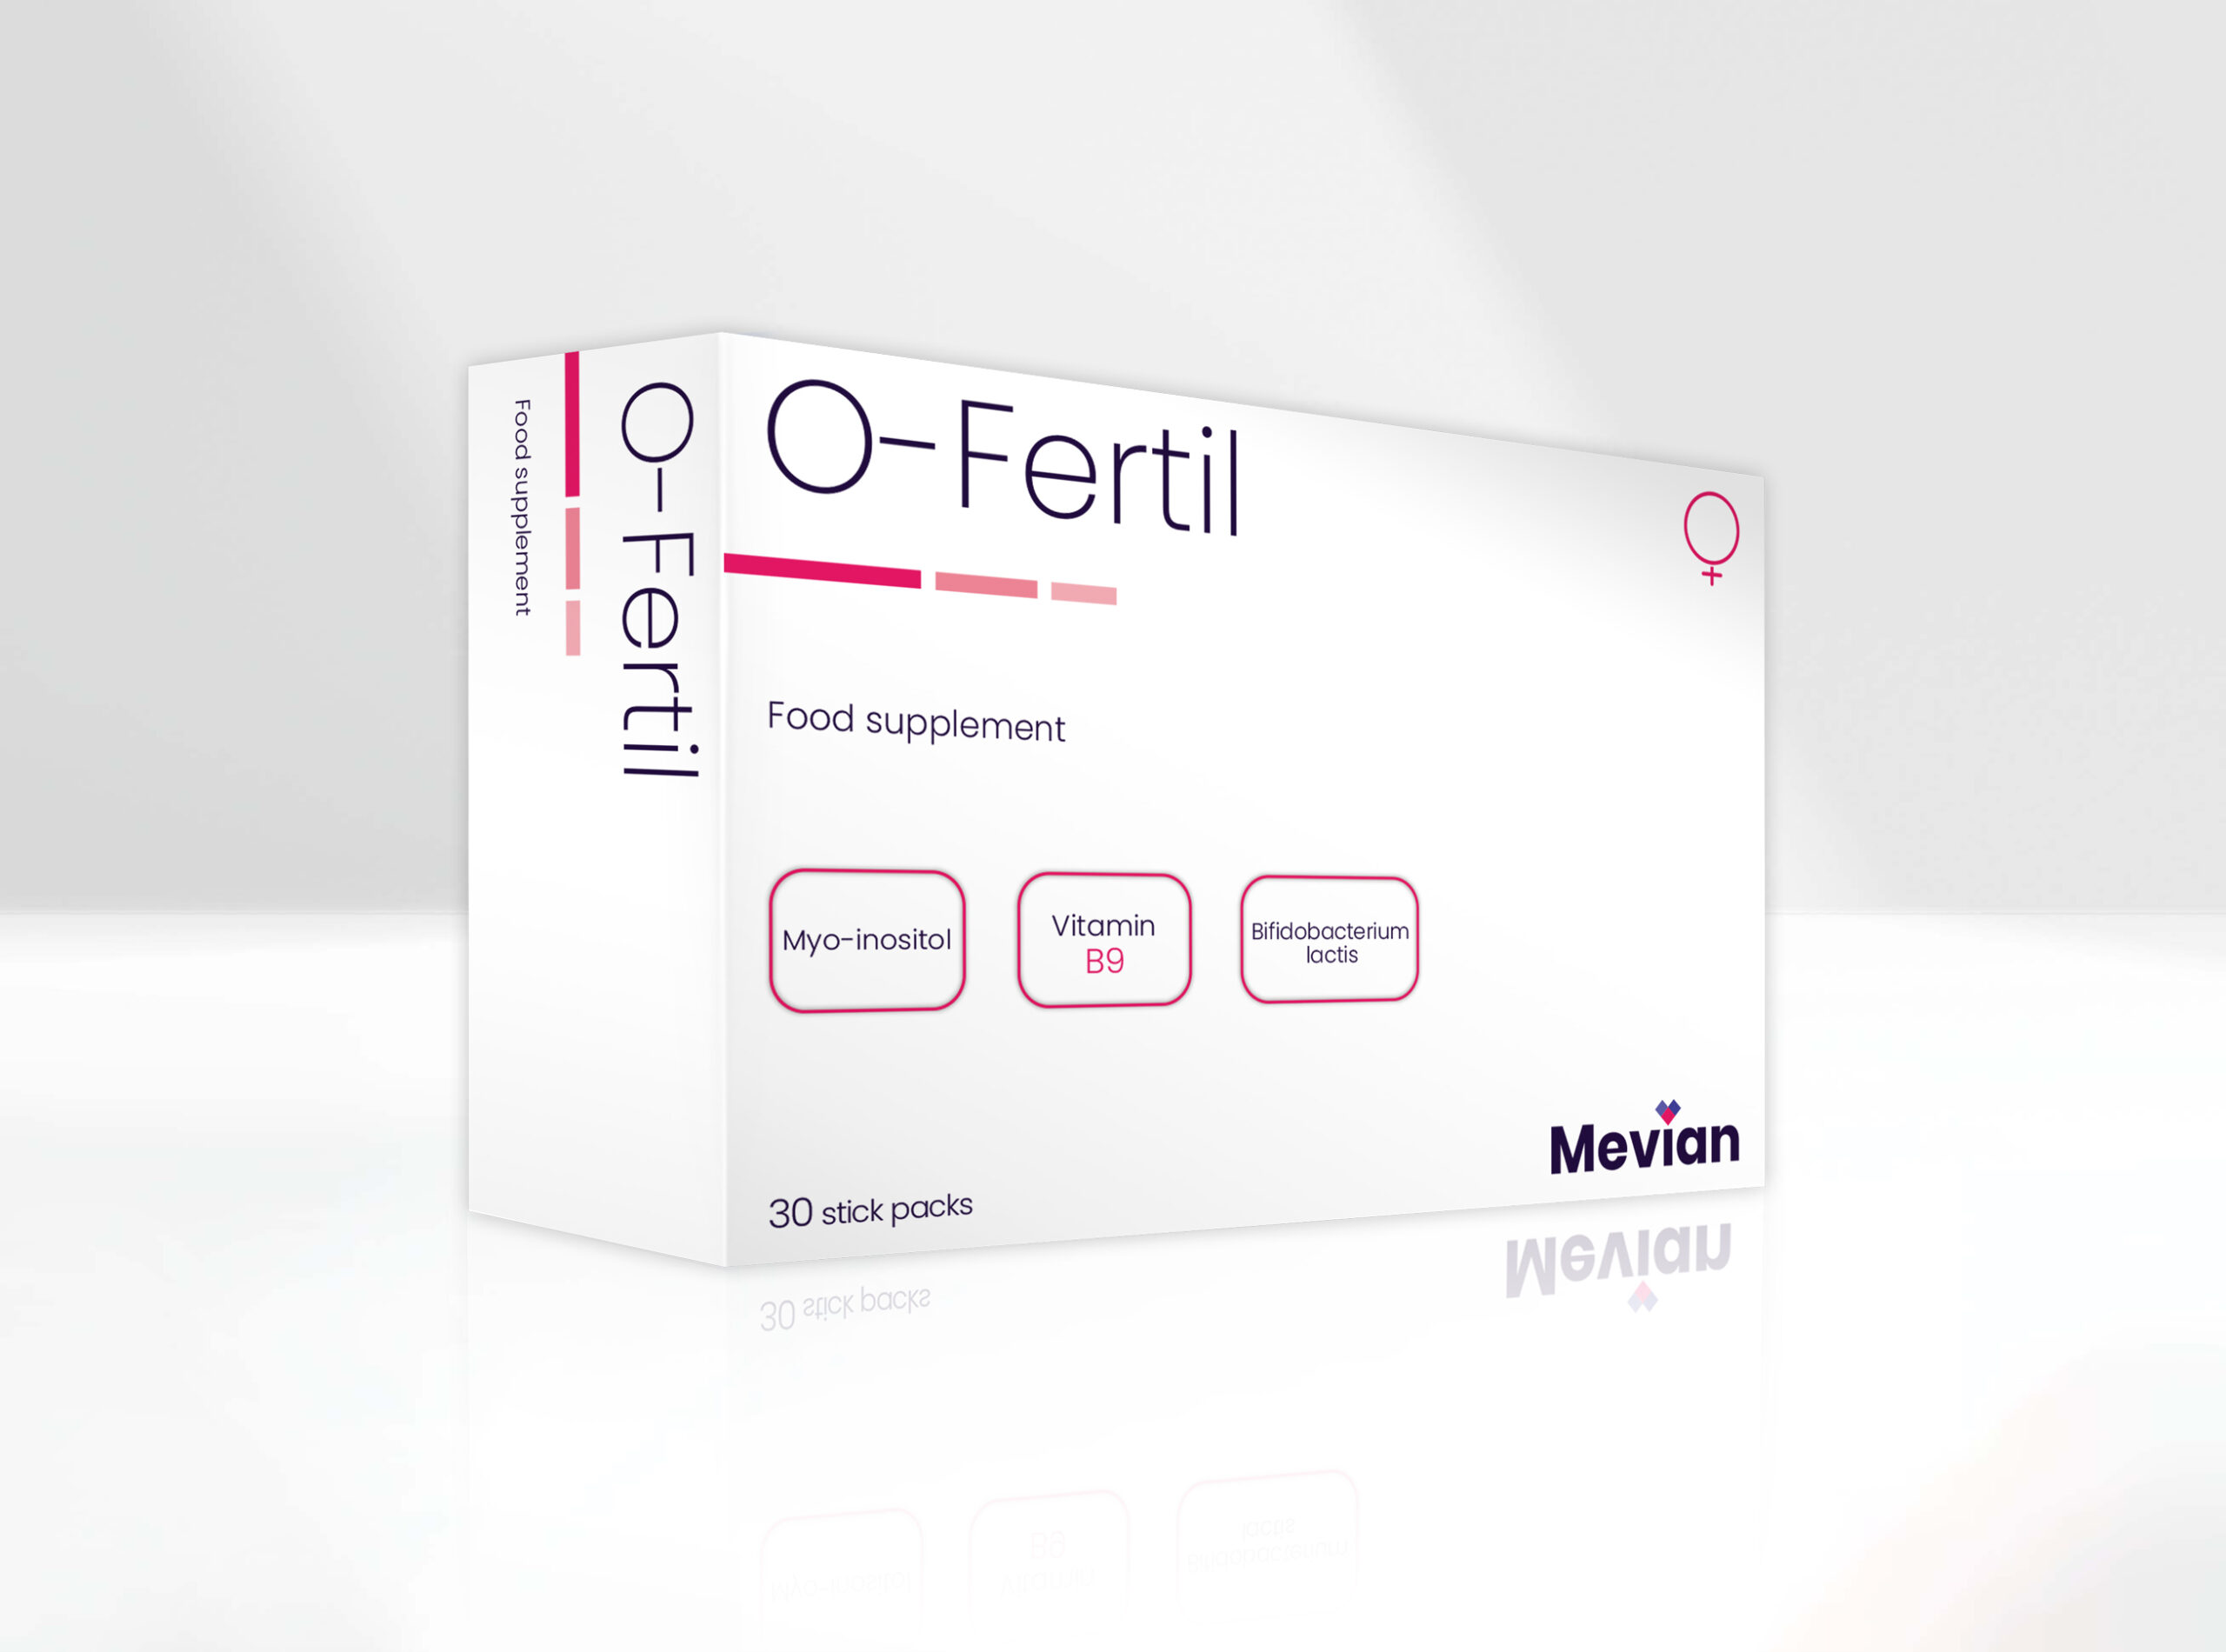 O-Ferti supports PCOS fertility (overweight phenotype) and gestational diabetes, which require fertility support and also helps manage hyperglycemia during gestational diabetes.